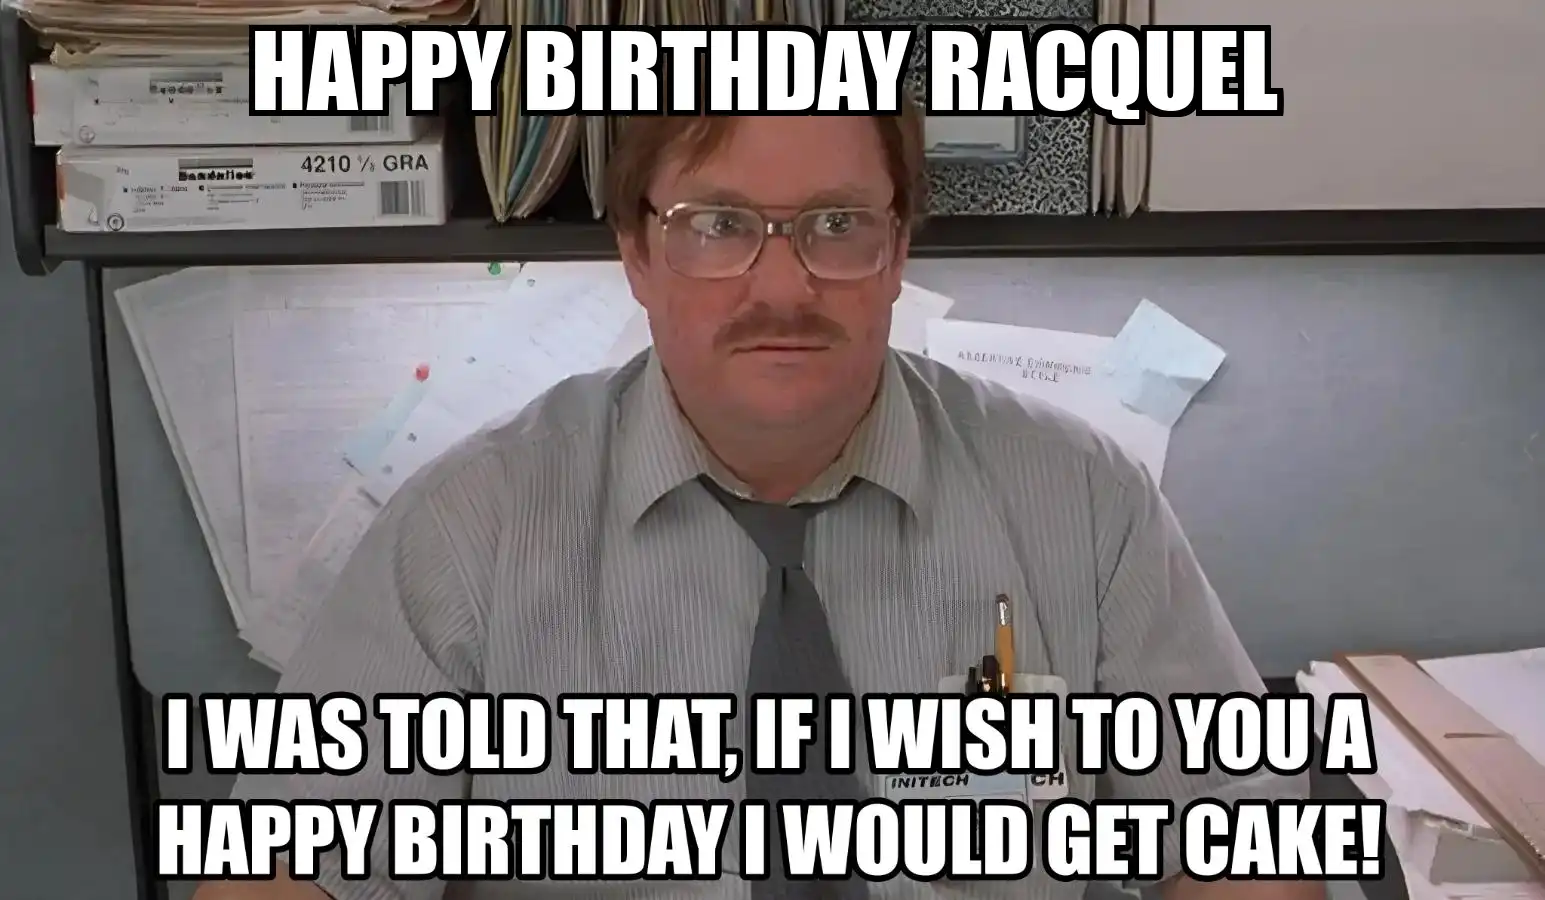 Happy Birthday Racquel I Would Get A Cake Meme